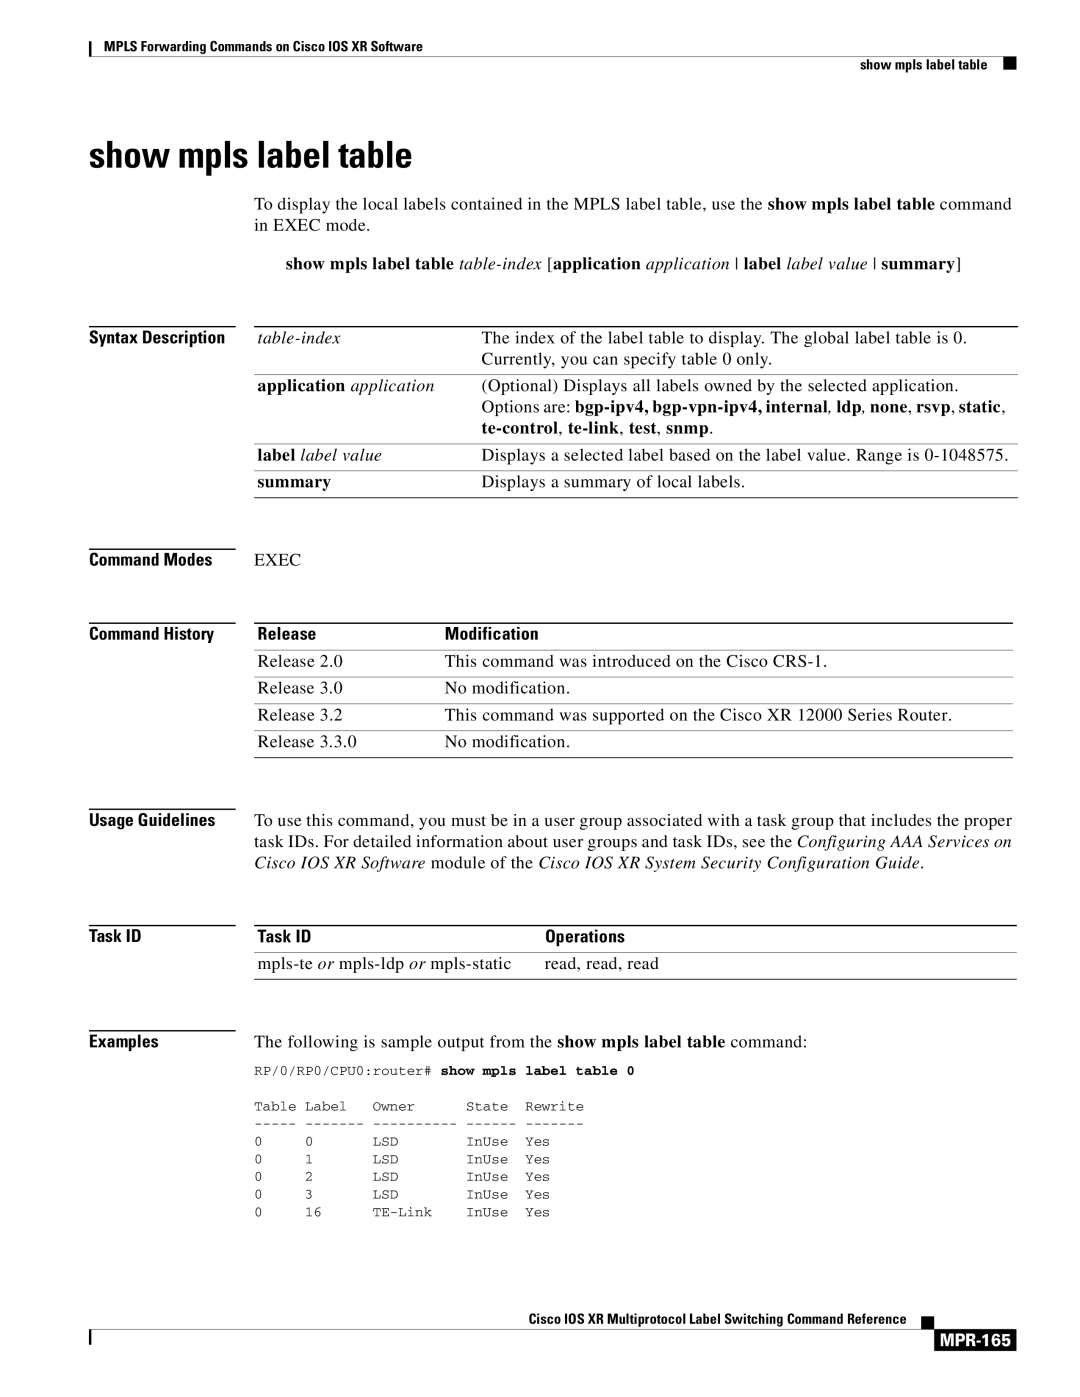 Cisco Systems MPR-151 manual Show mpls label table, MPR-165, Label table 